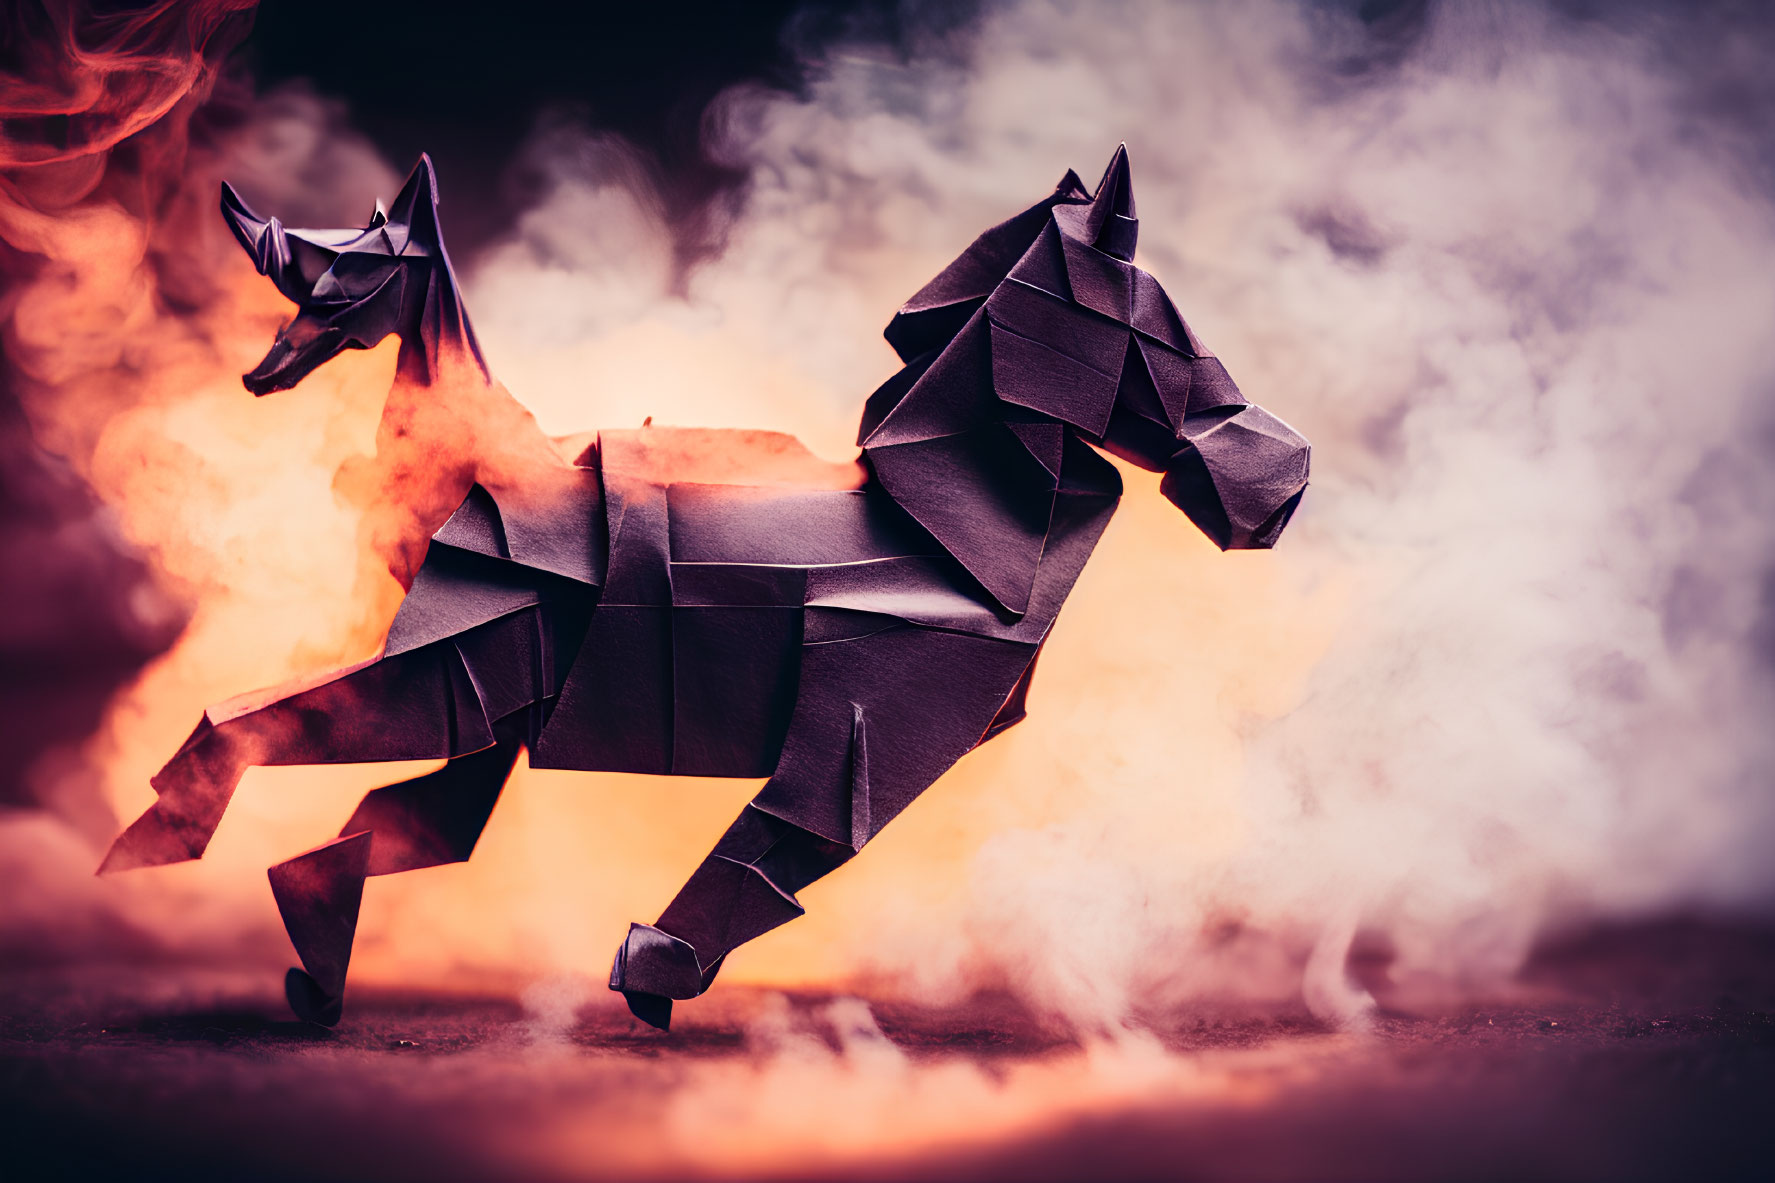 Origami Wolf and Horse in Fiery, Smoky Scene